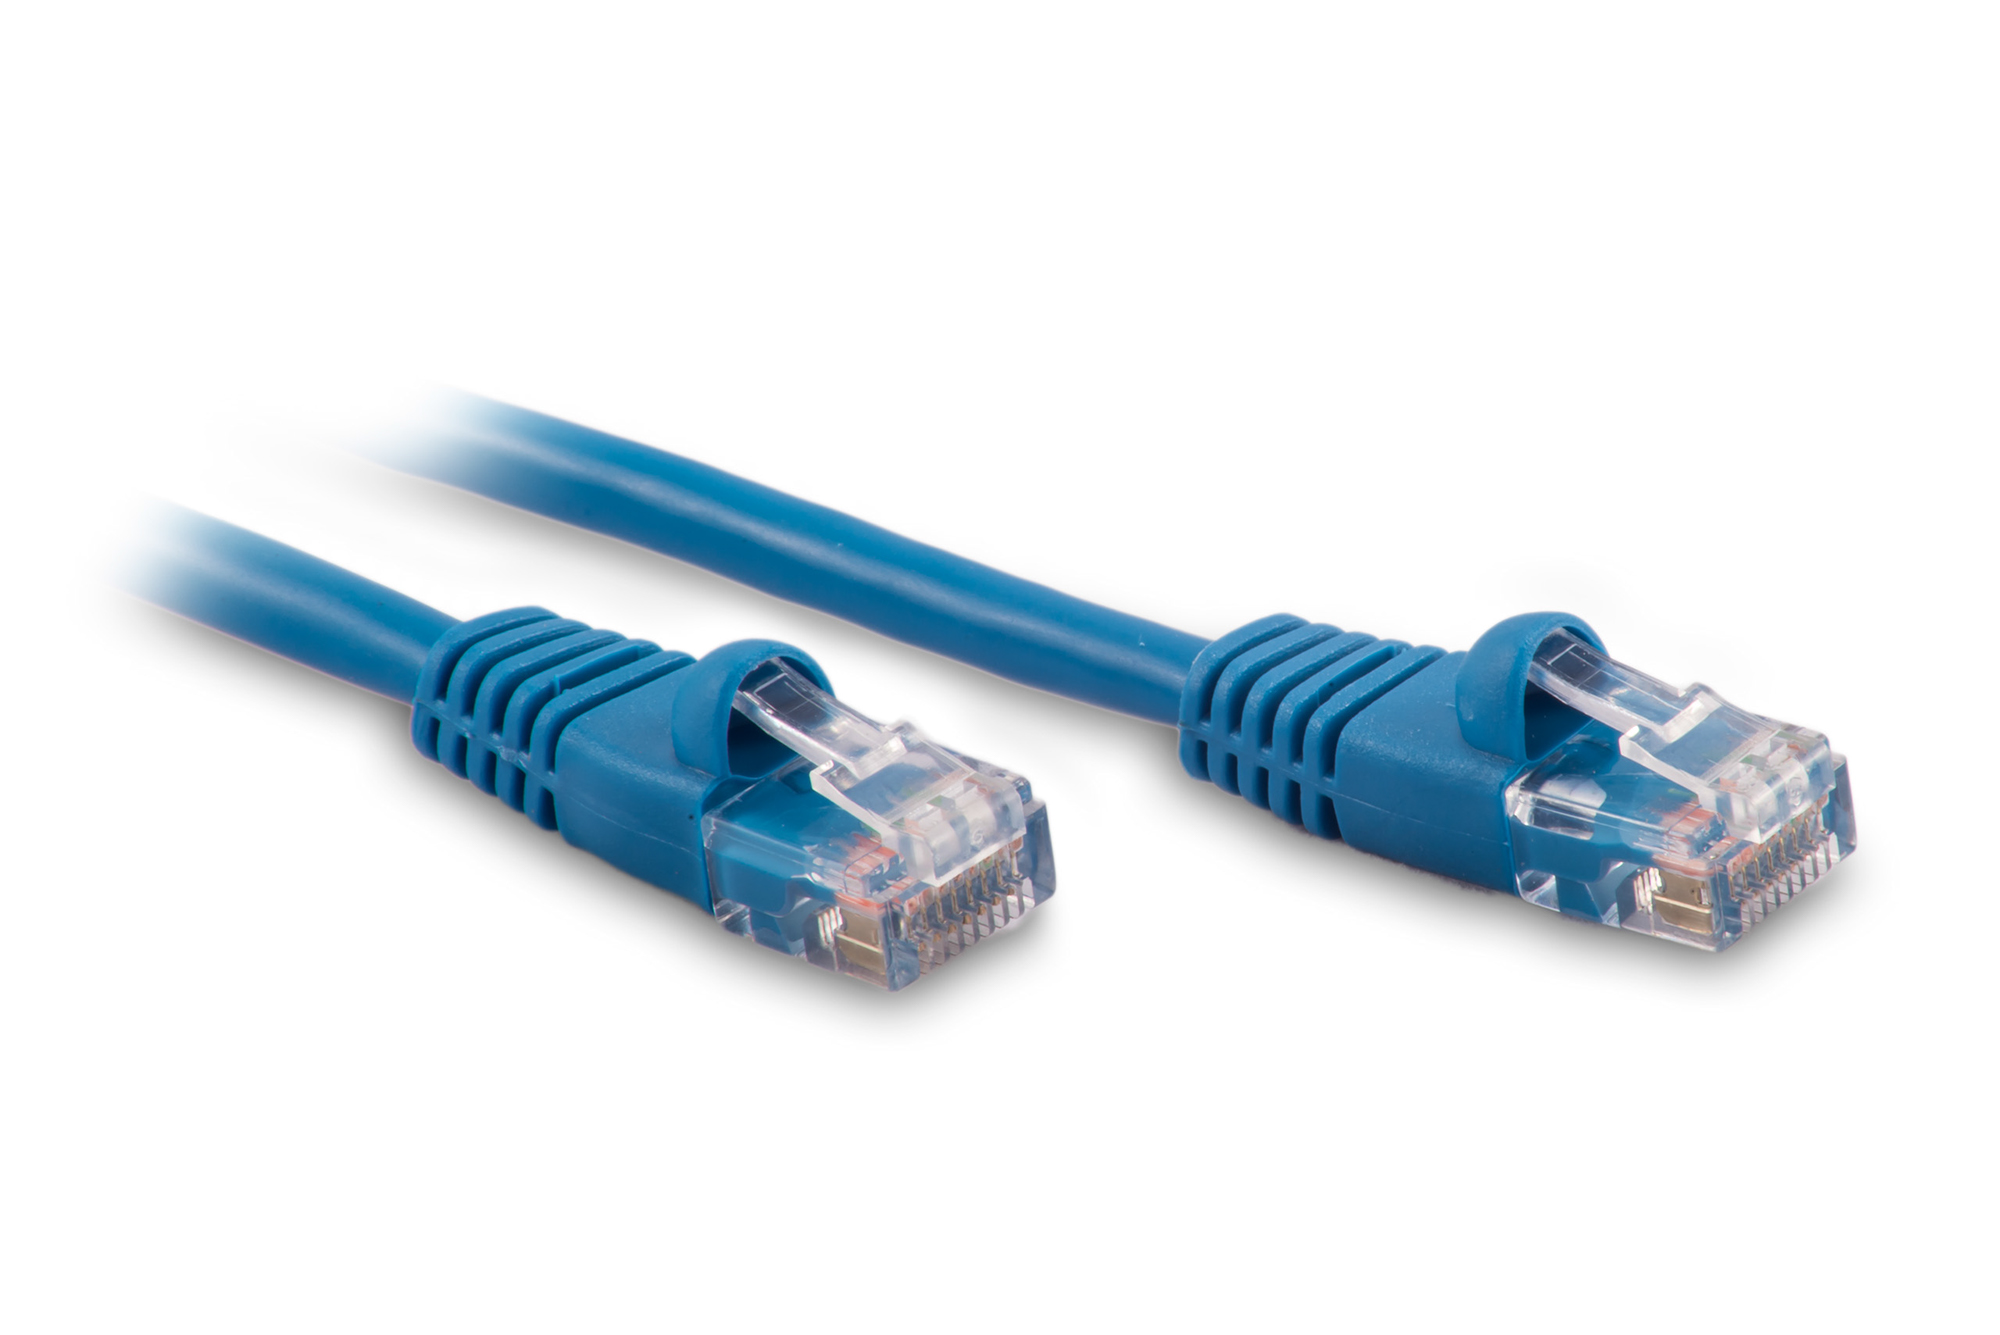 10ft Cat6 Ethernet Patch Cable - Blue Color - Snagless Boot, Stranded, RJ45, 550Mhz, 24AWG